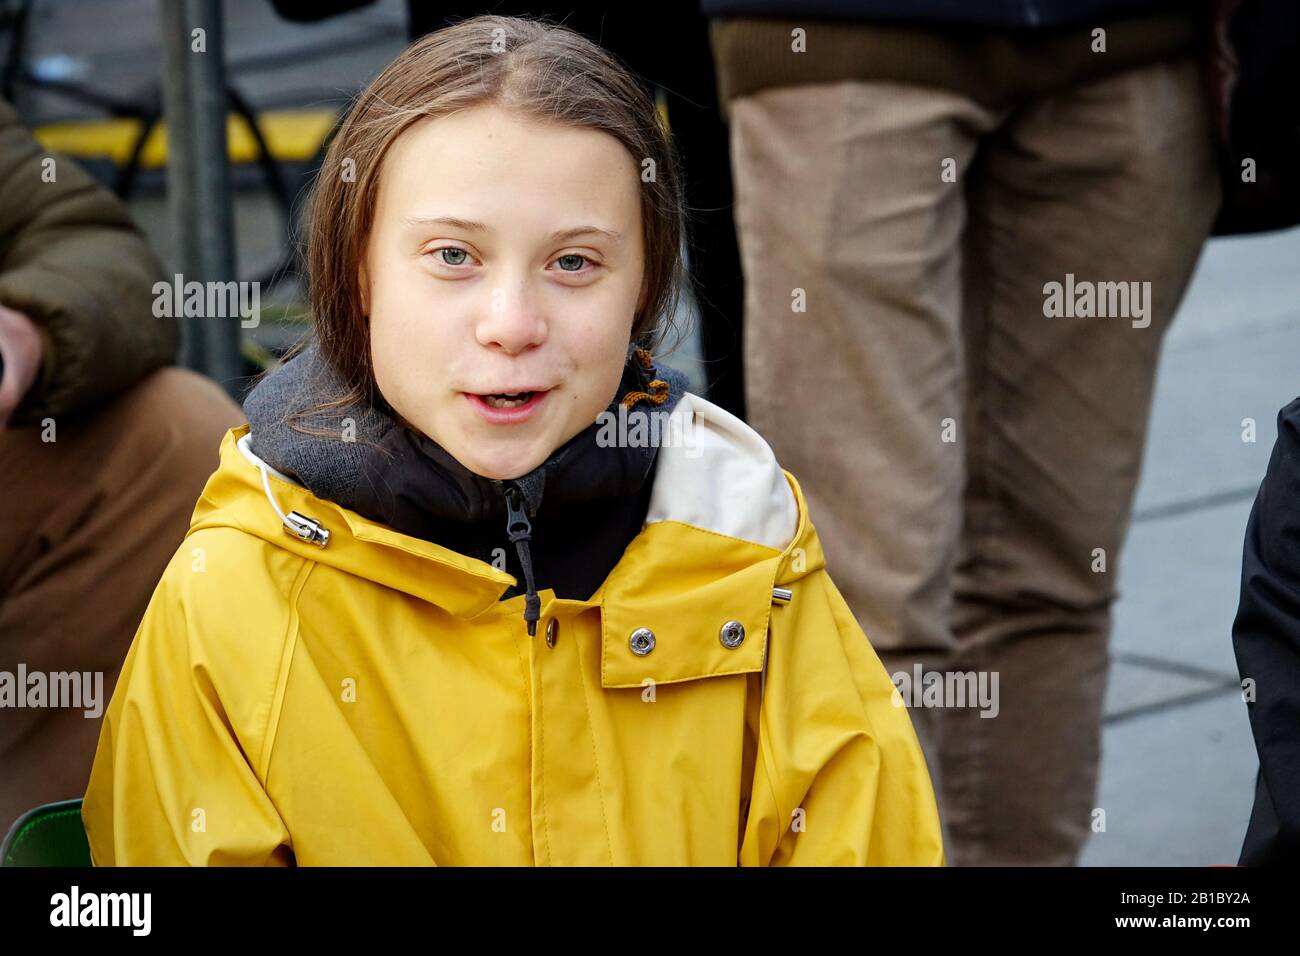 Greta Thunberg at the 'Fridays For Future' event in Turin. Turin, Italy - December 2019 Stock Photo